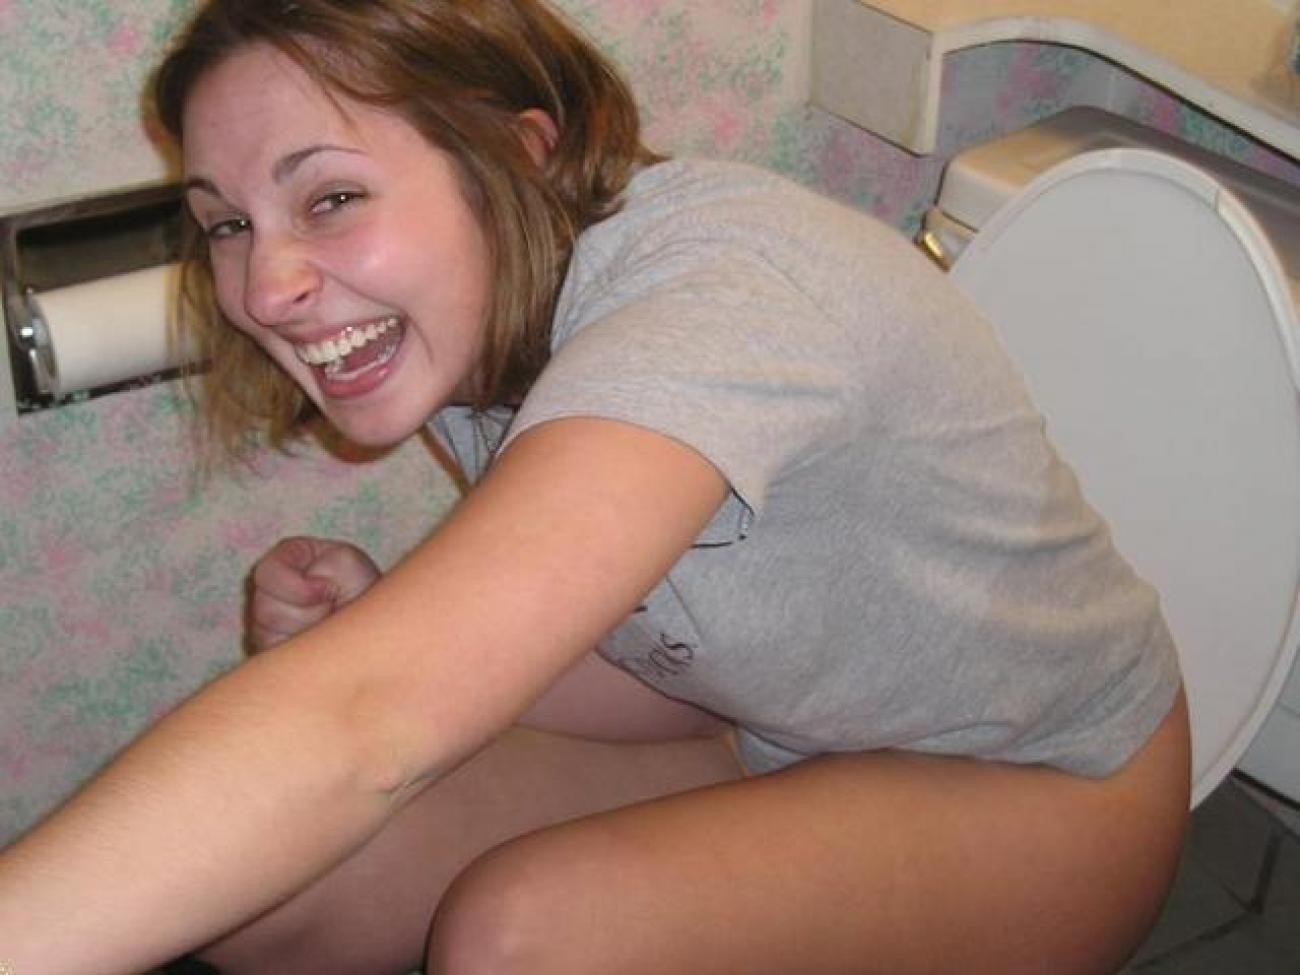 Naughty and trashy teens photographed pissing #77133814